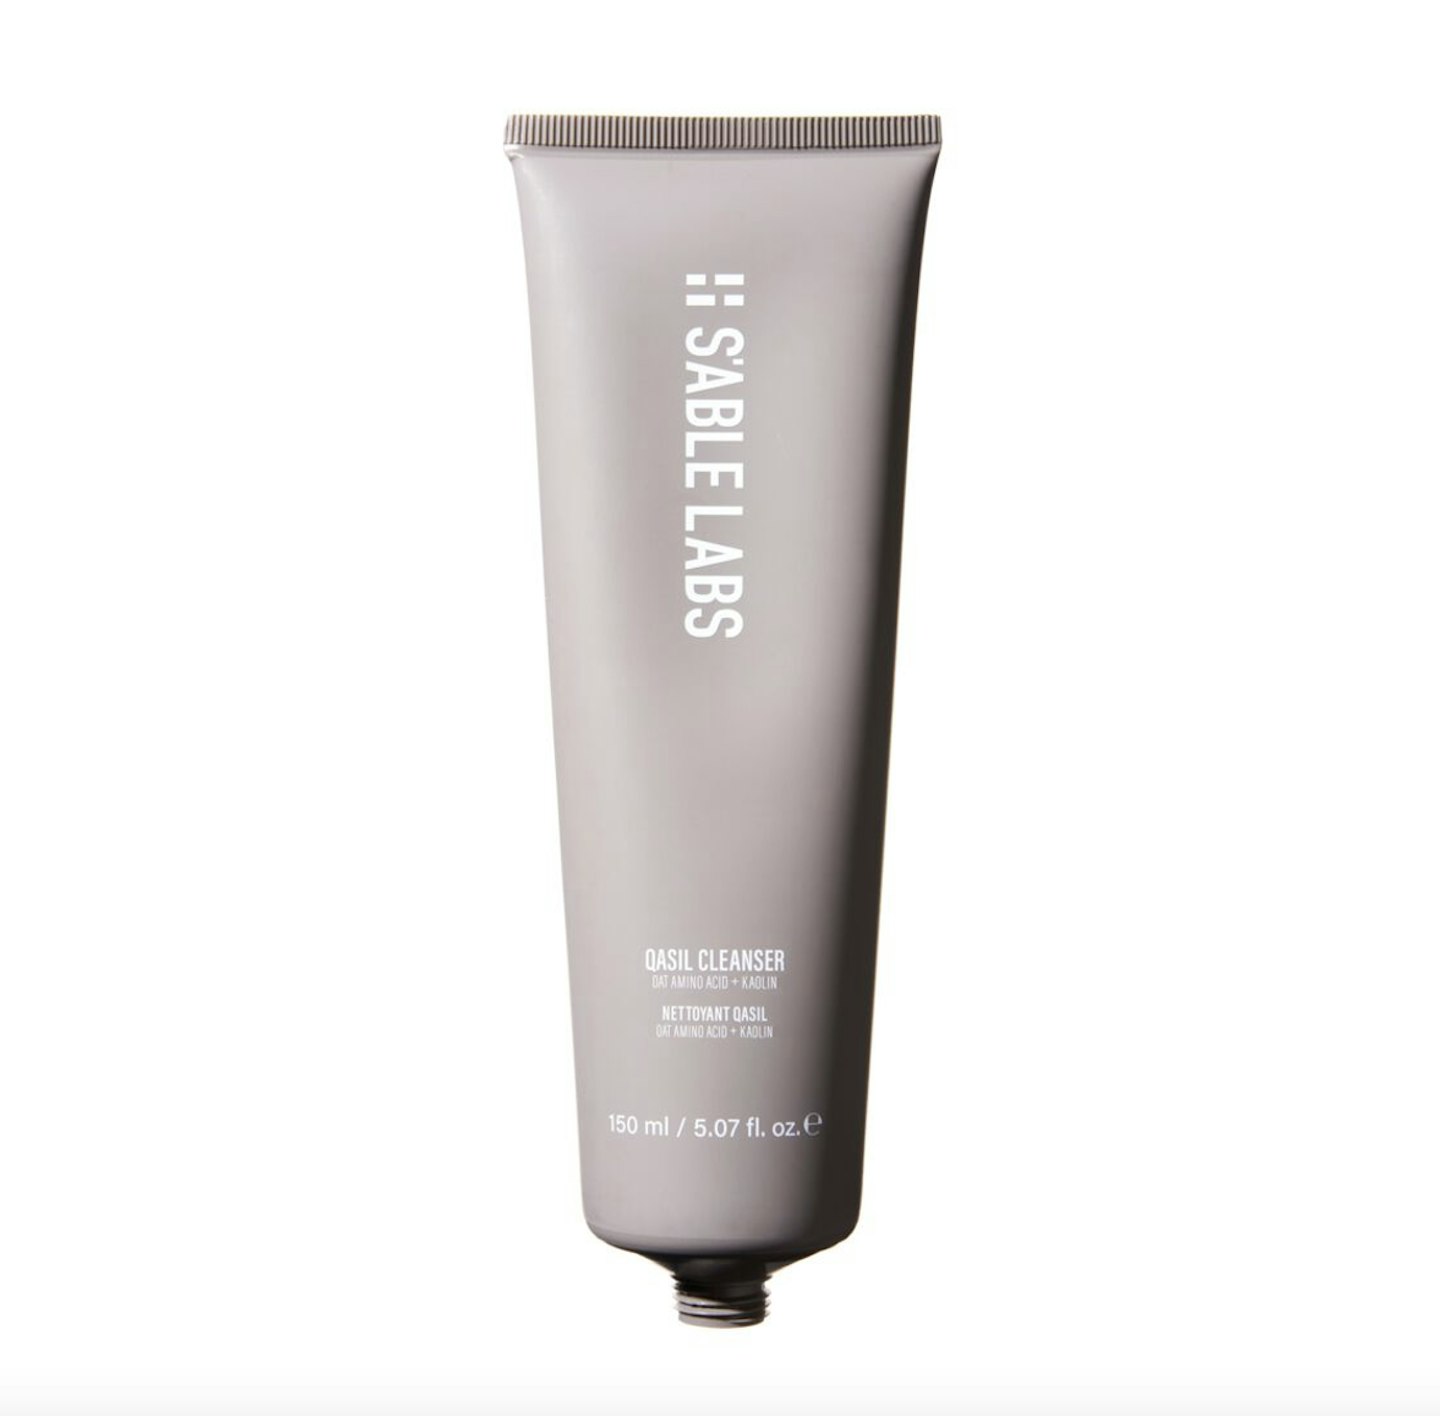 CHOICE CLEANSER: S’ABLE LABS QASIL CLEANSER